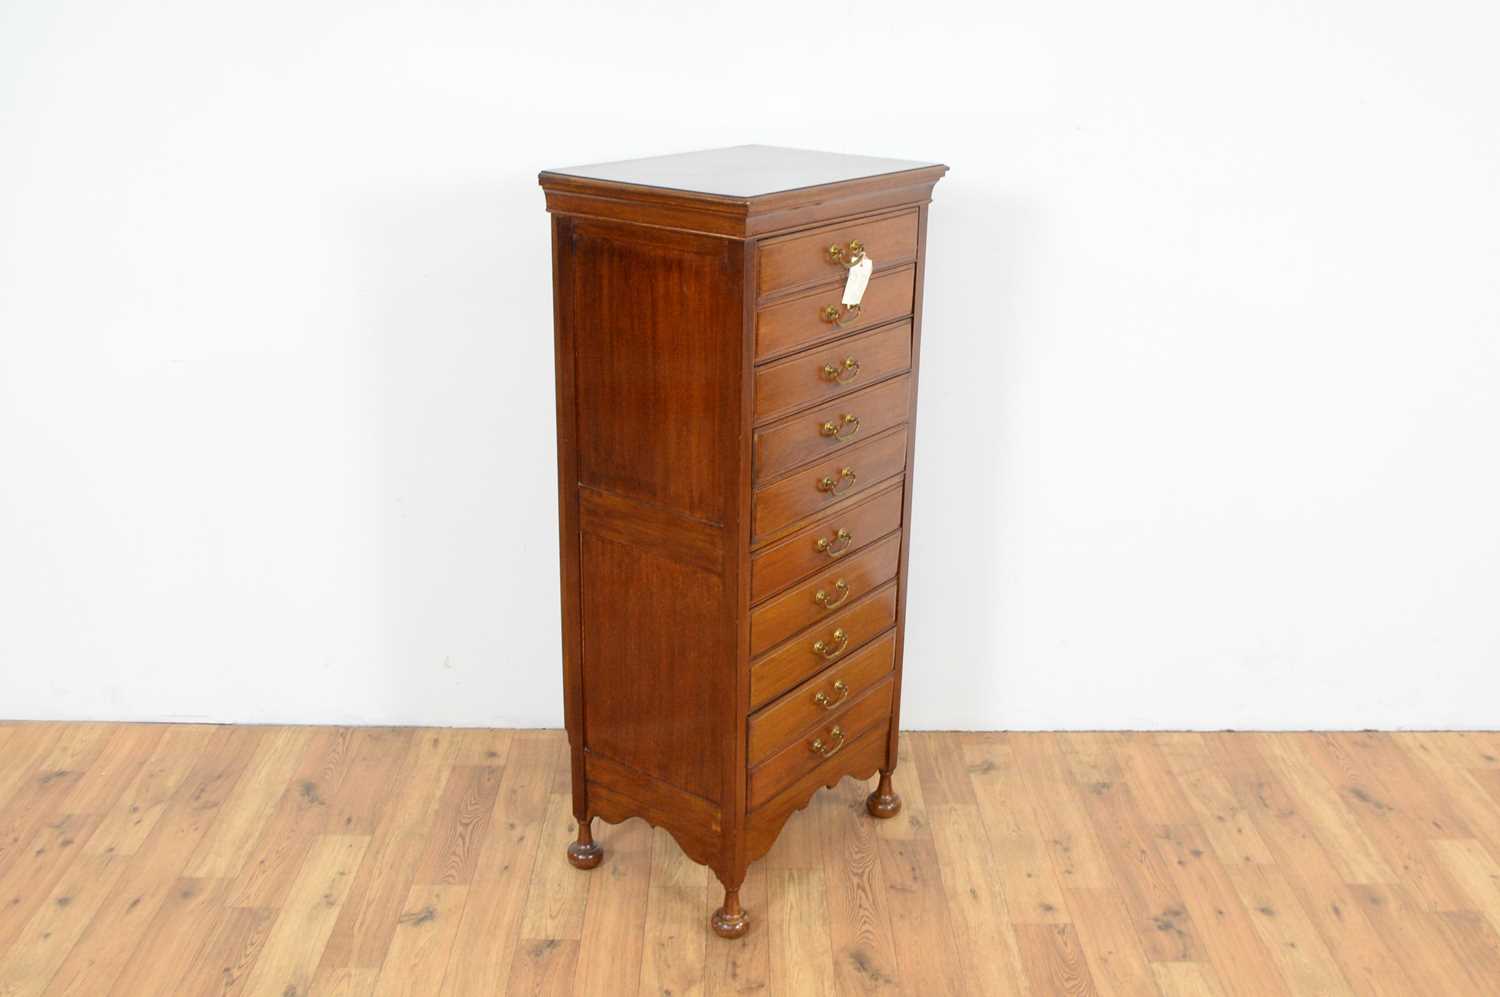 A 20th Century mahogany music cabinet with a glazed bookcase - Image 6 of 7